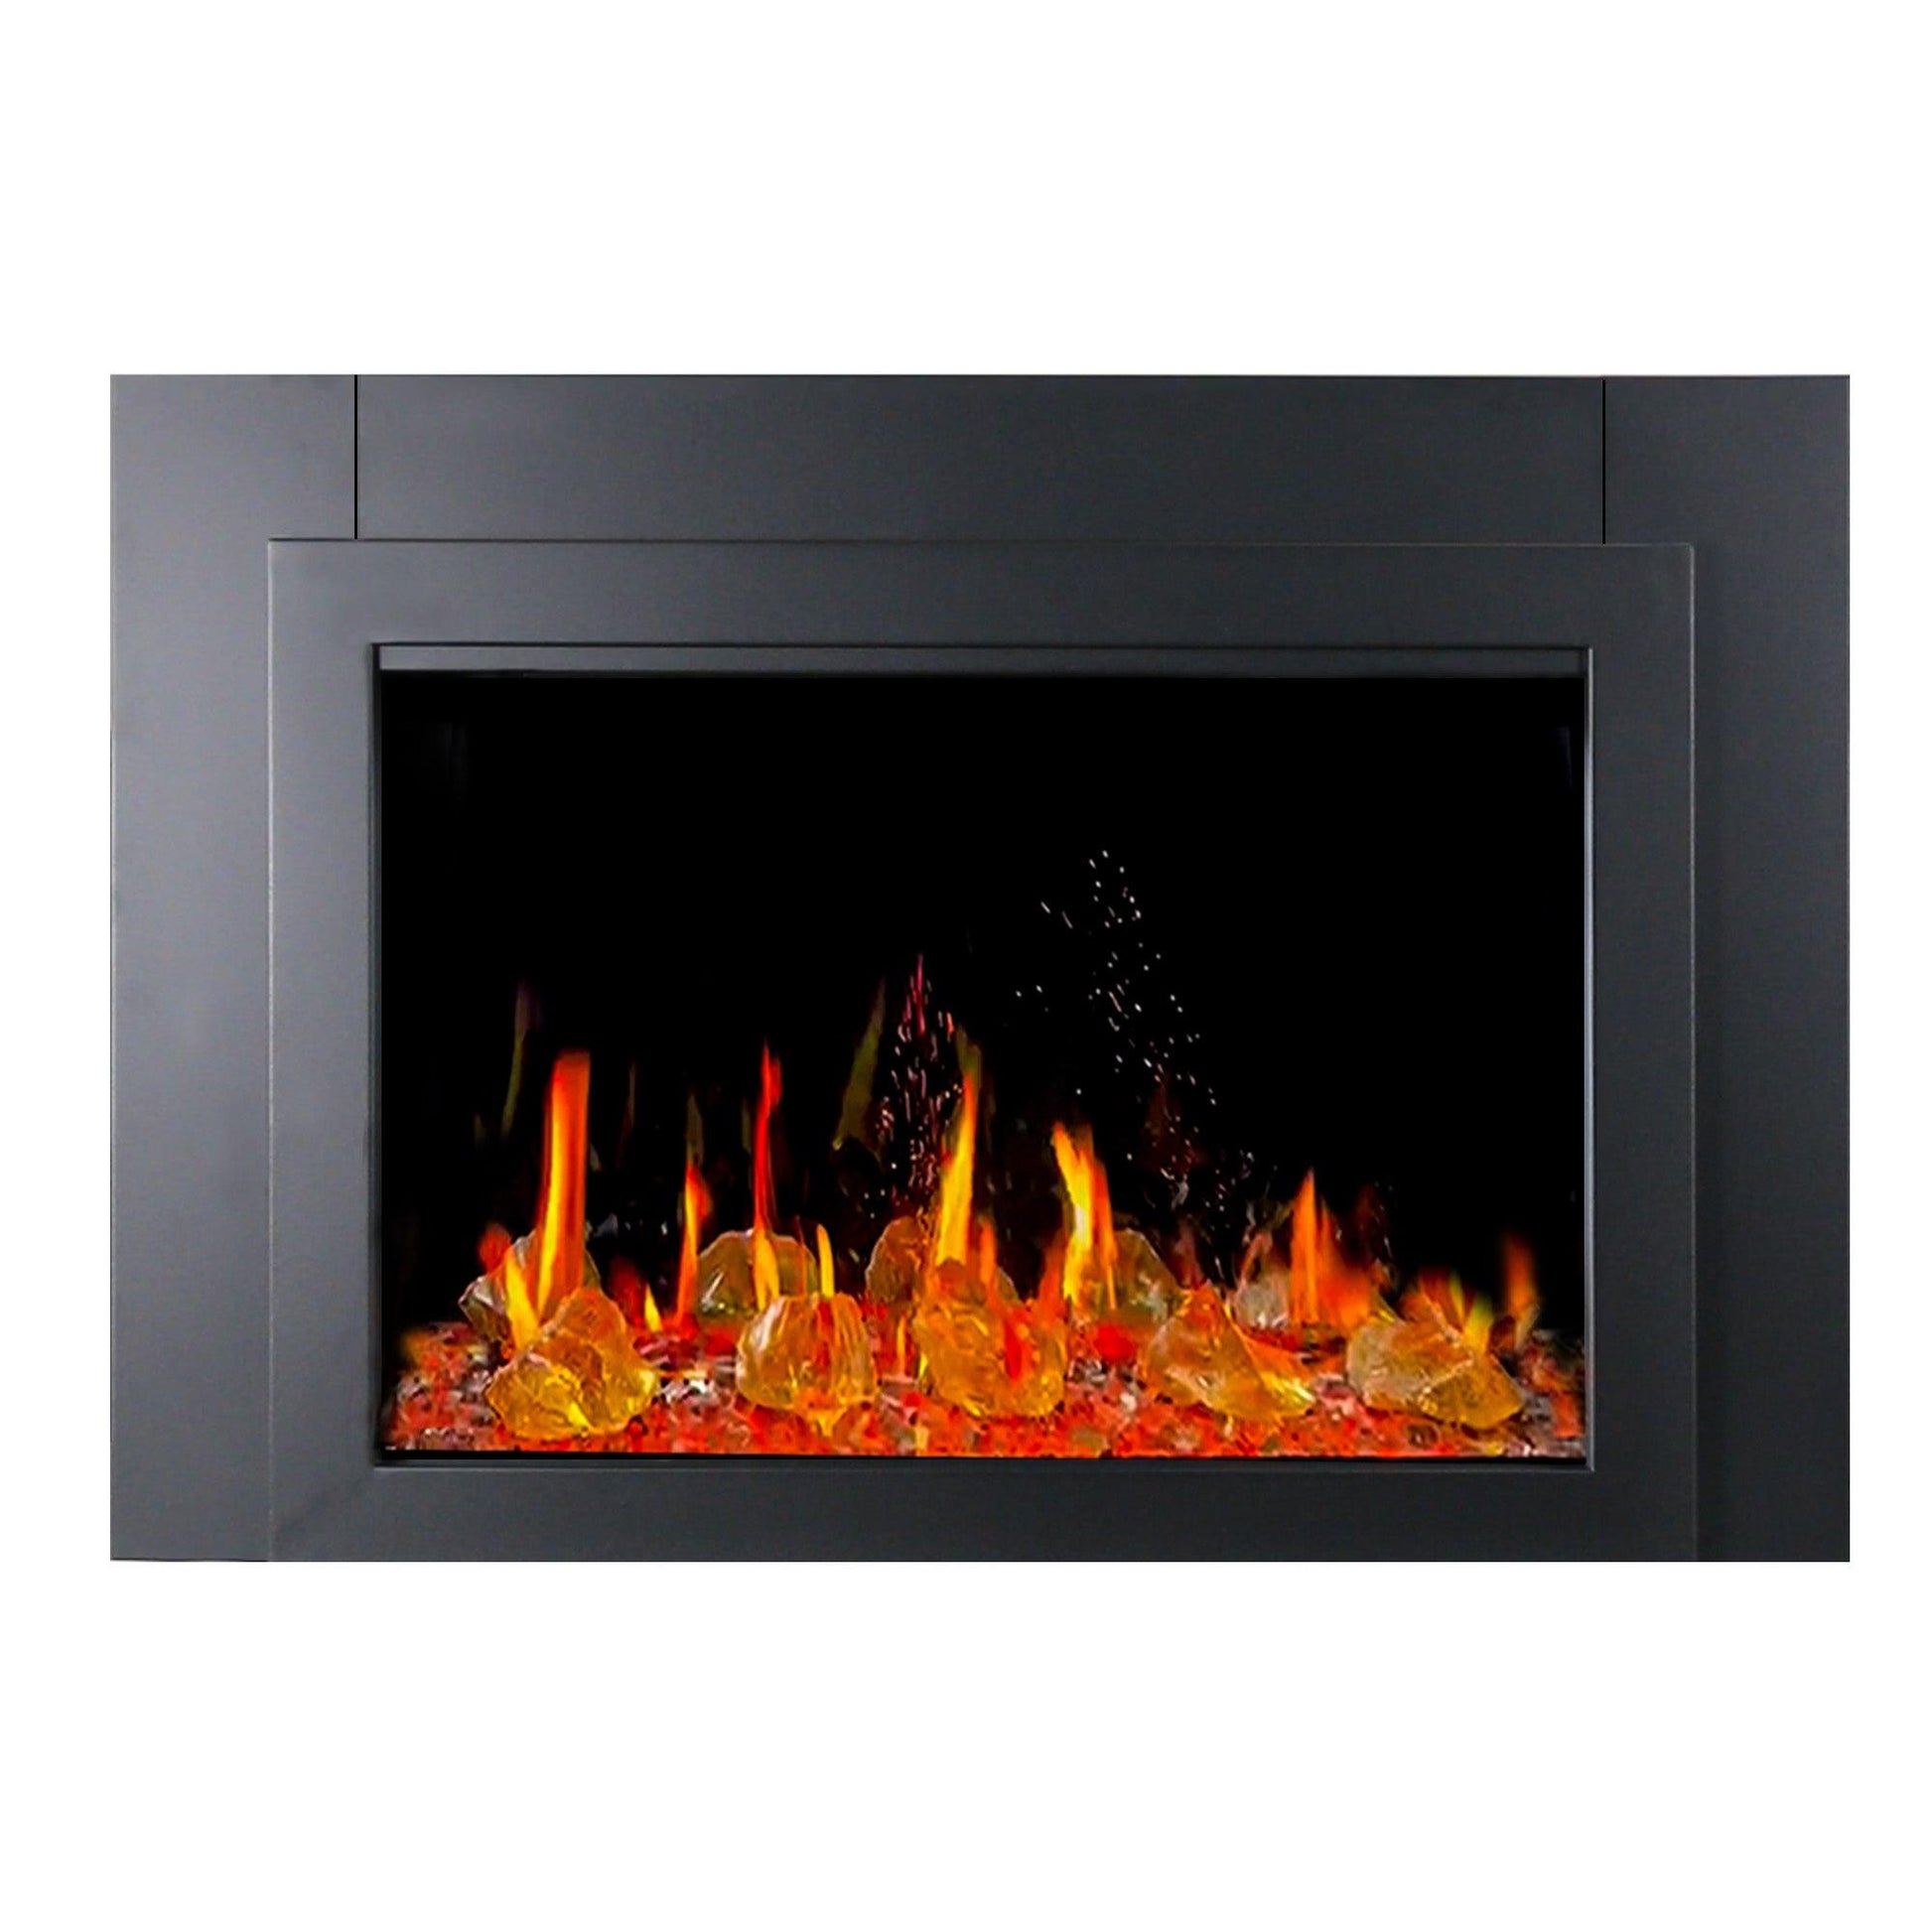 ZopaFlame™ 38" Smart Electric Fireplace Insert Black - BGSZP3038 - ZopaFlame Fireplaces